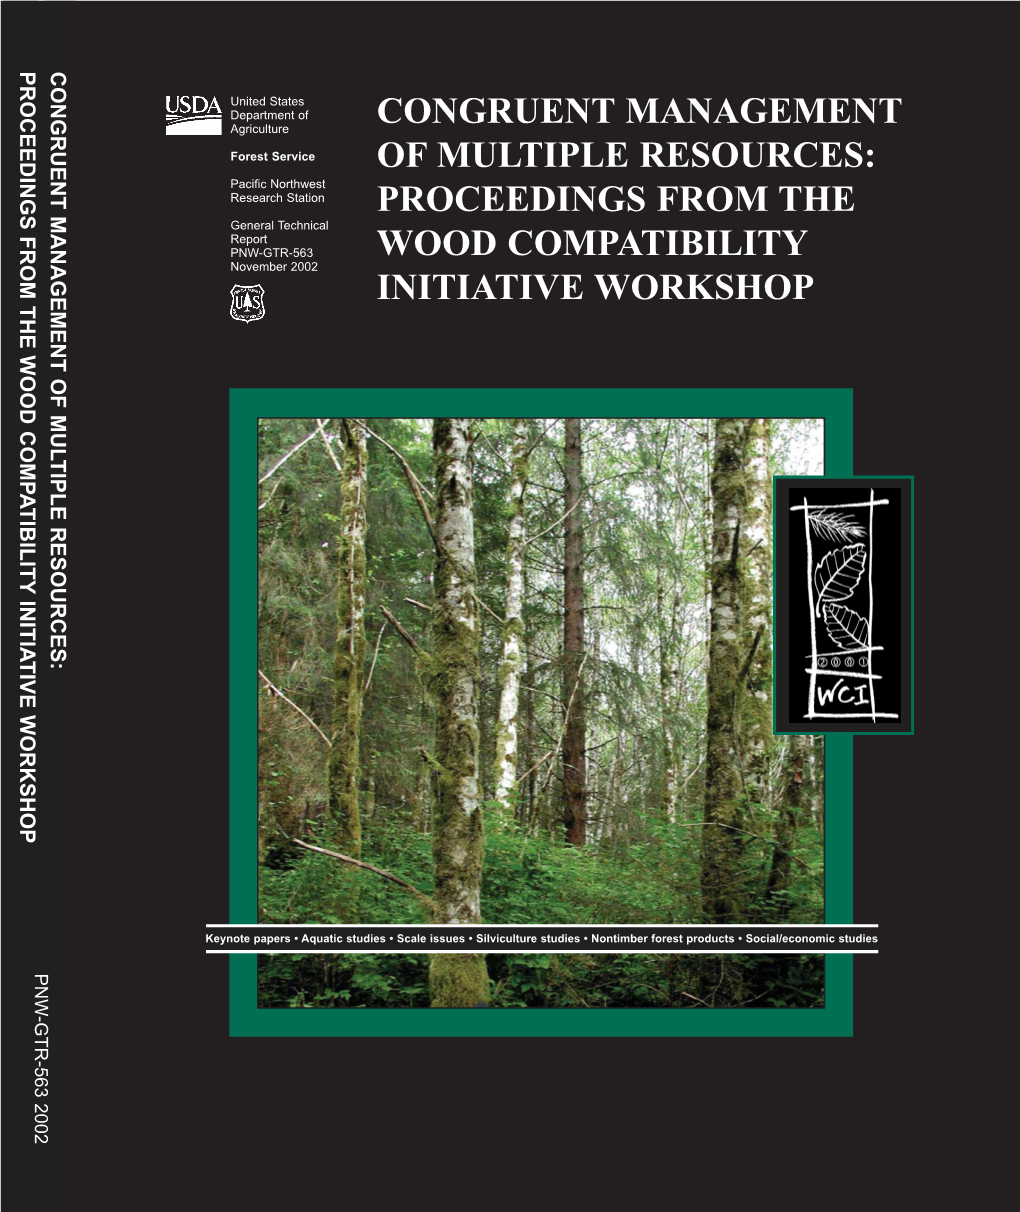 Proceedings from the Wood Compatibility Initiative Workshop